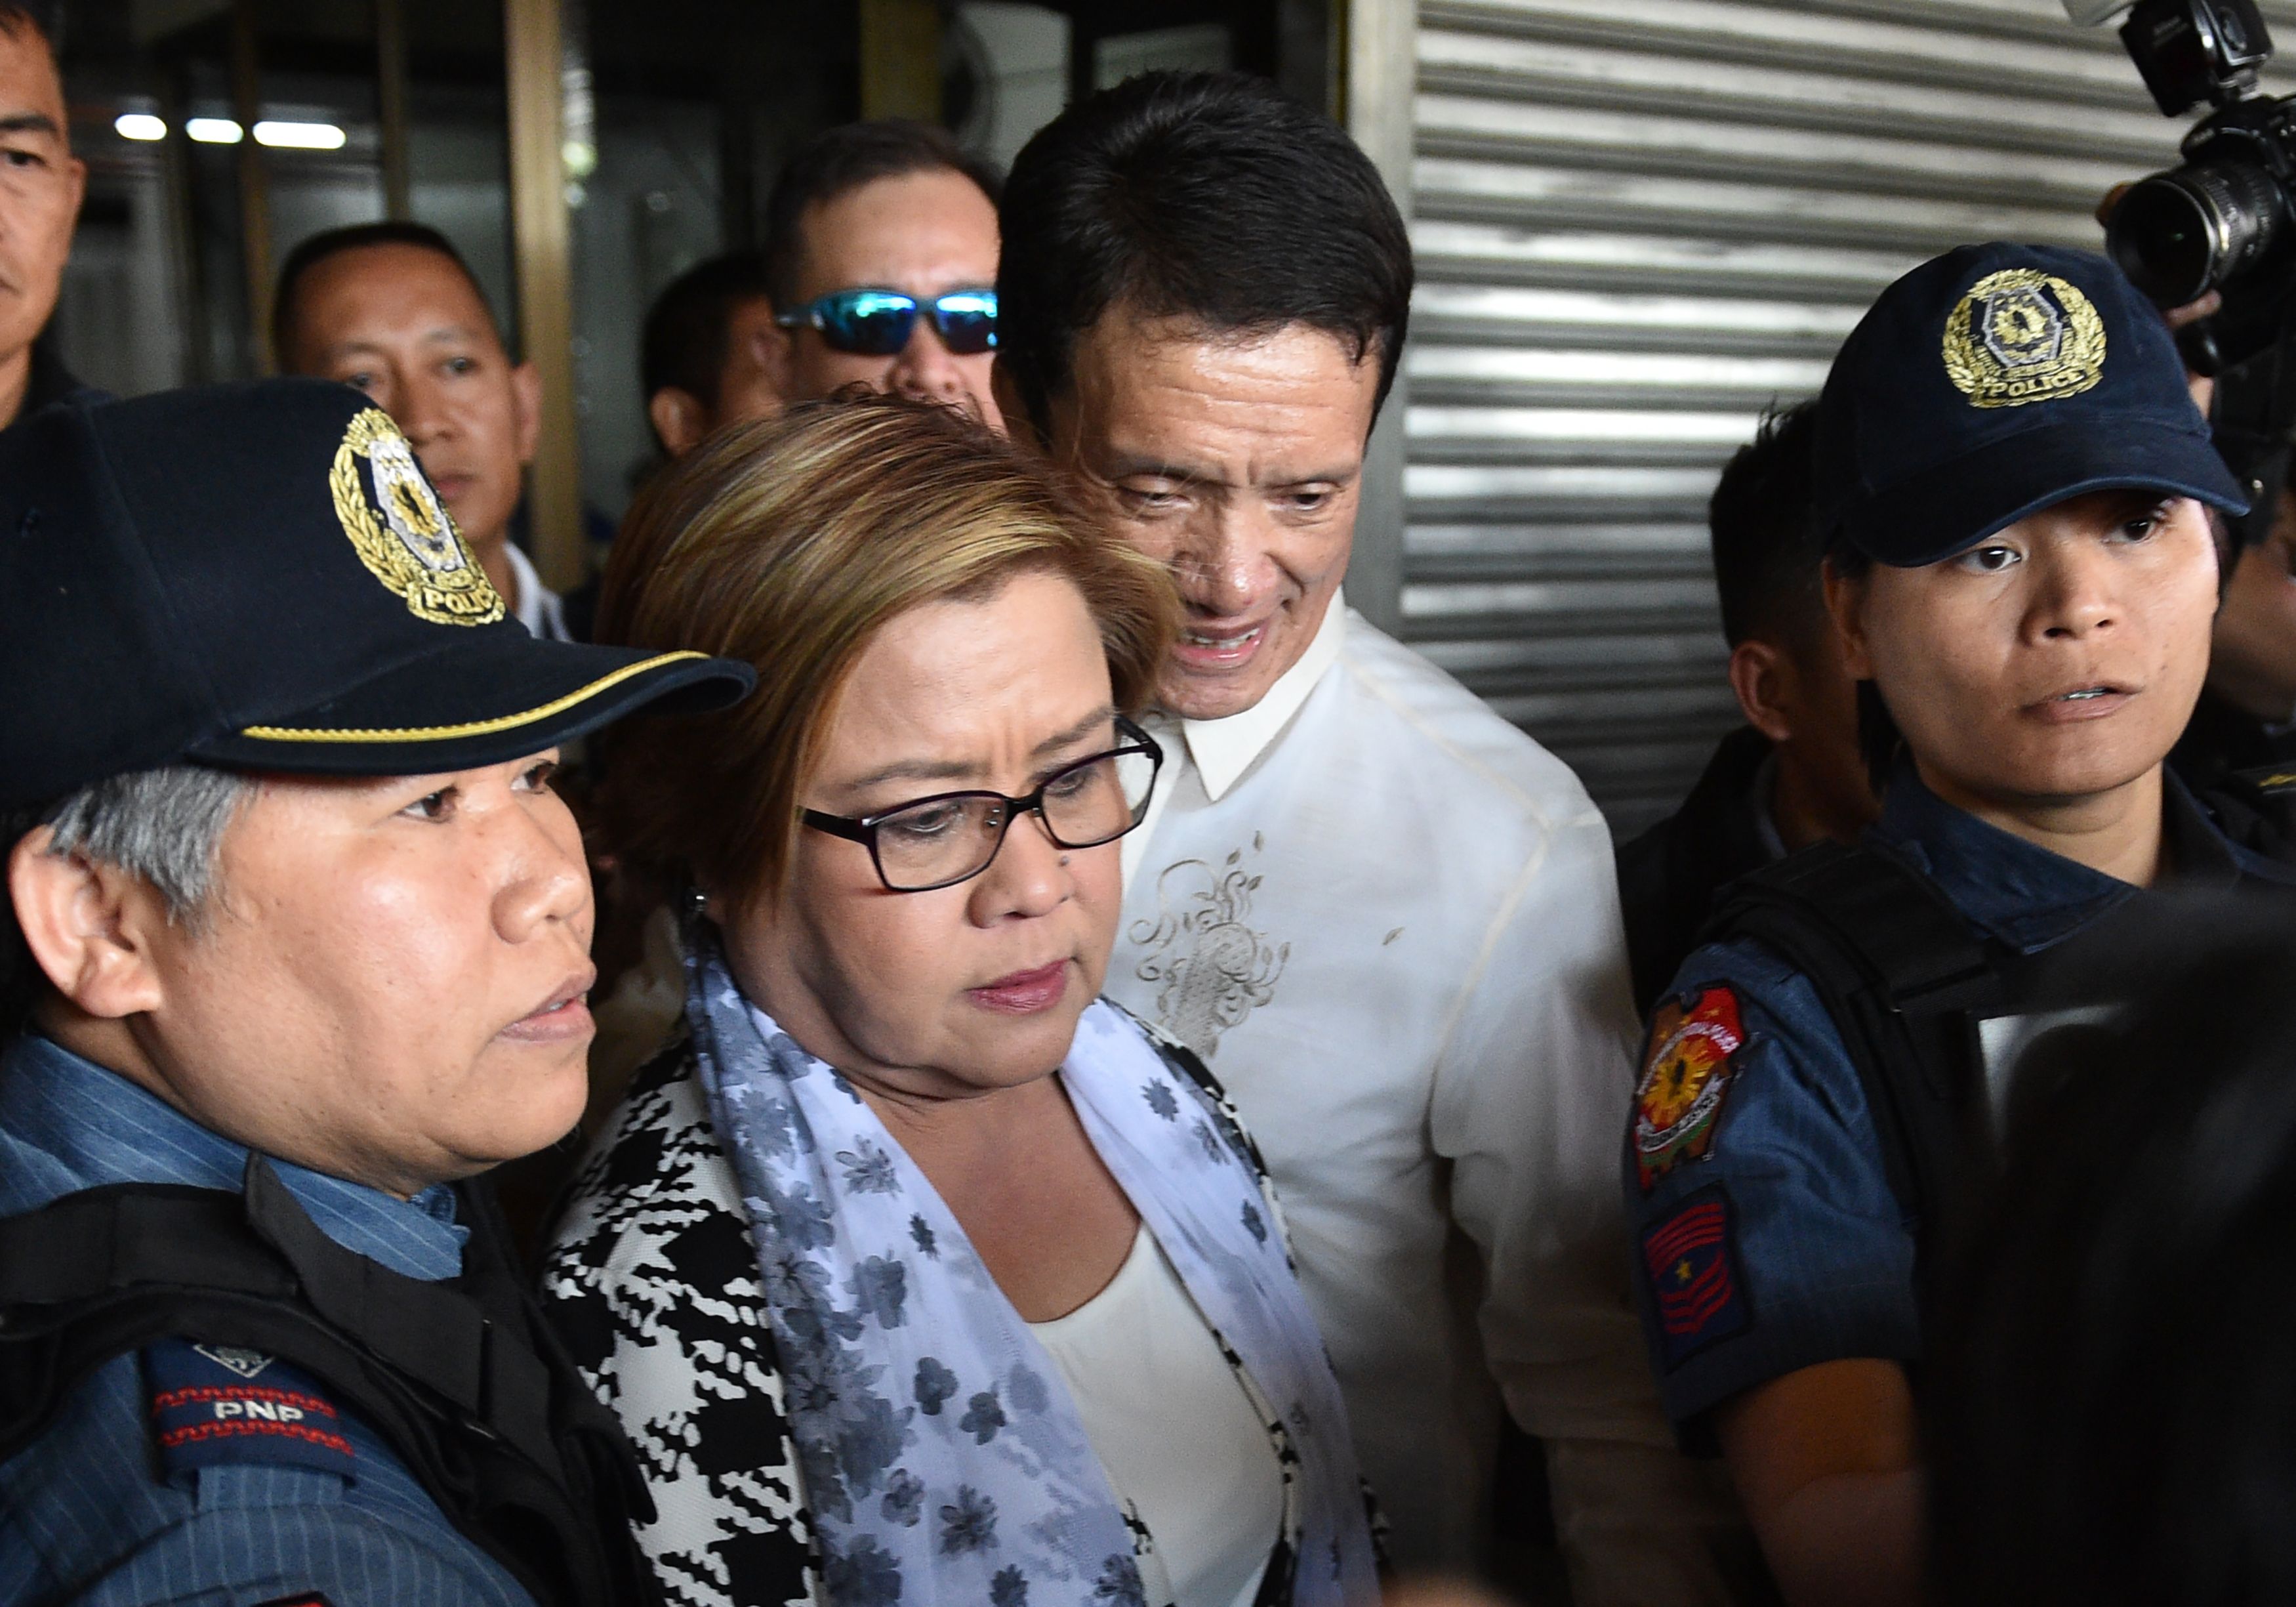 Philippine Senator Leila de Lima, center, a top critic of President Rodrigo Duterte, is escorted by police officers and her lawyer after her arrest at the Senate in Manila on Feb. 24, 2017 (Ted Aljibe—AFP/Getty Images)